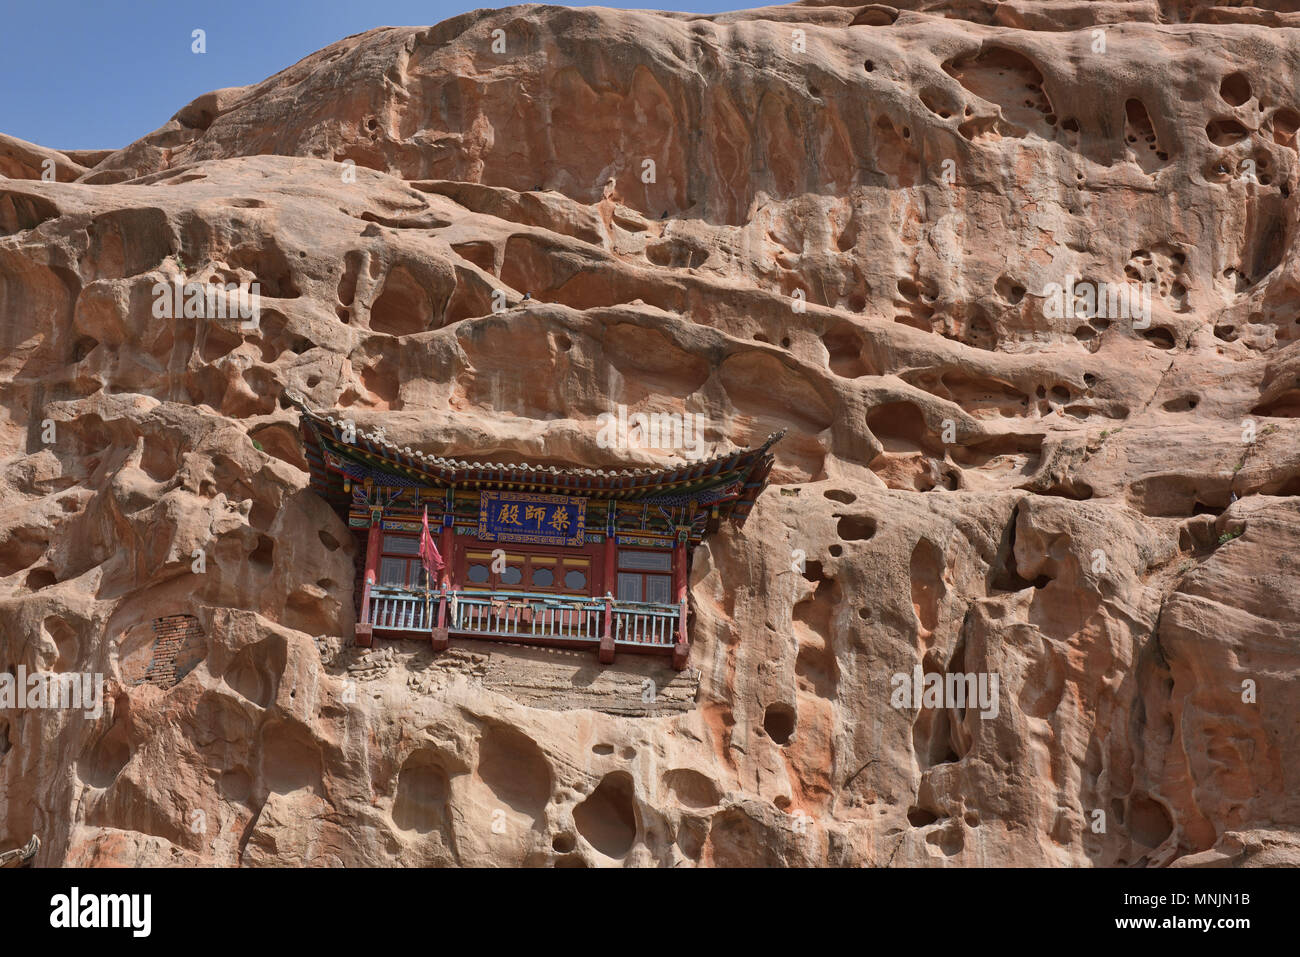 The Mati Si Temples in the Cliff, Zhangye, Gansu, China Stock Photo